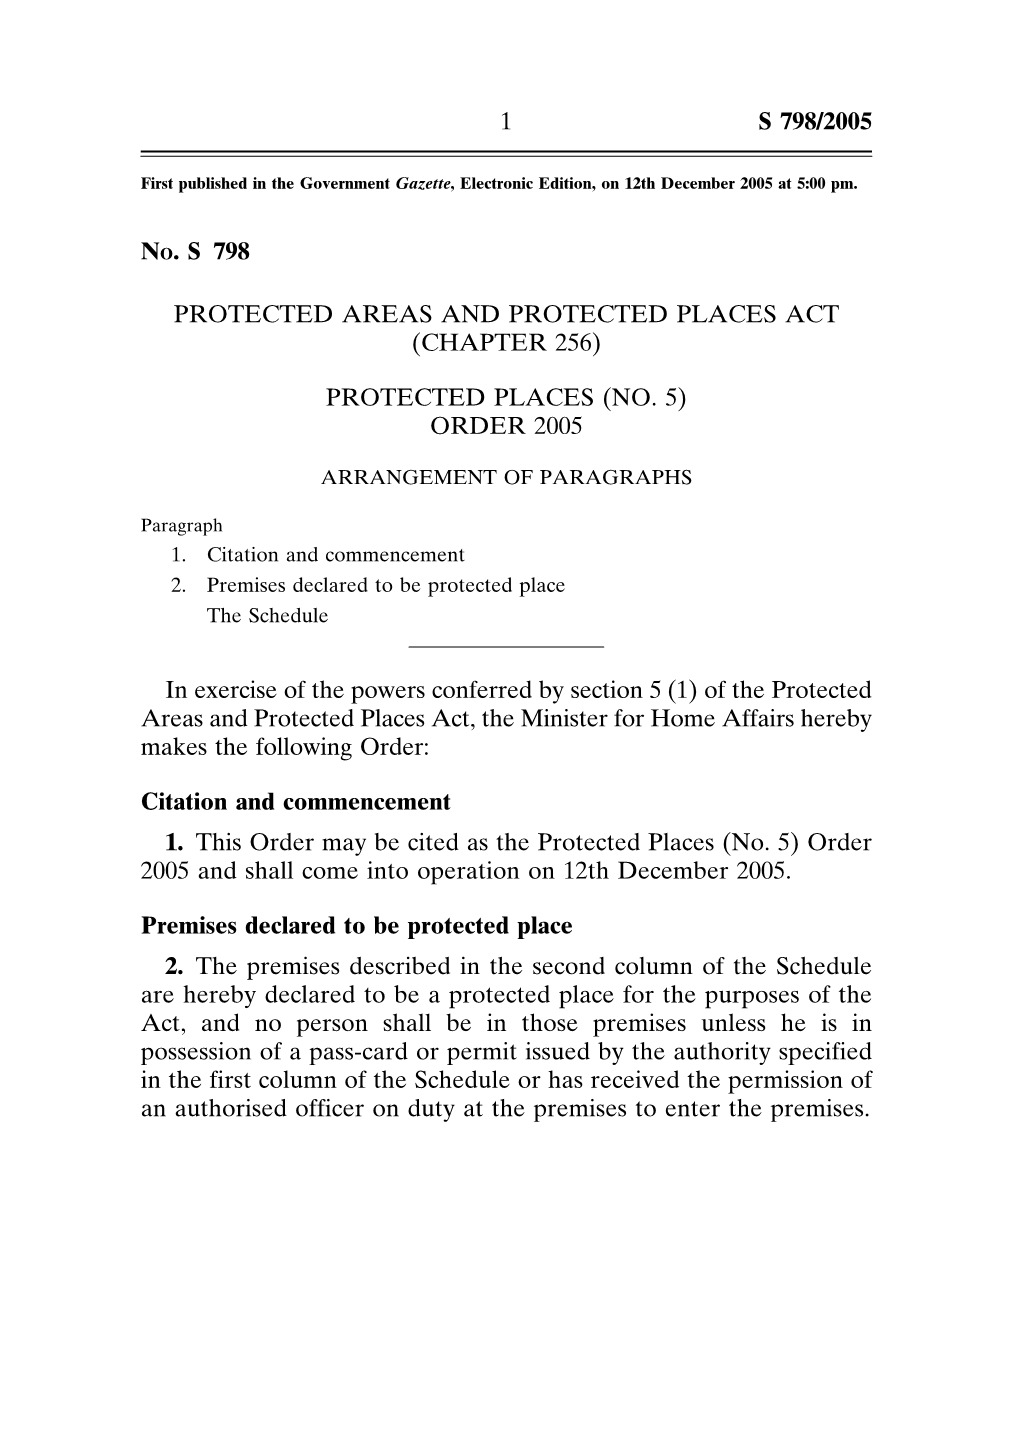 NO. S 798 PROTECTED AREAS and PROTECTED PLACES ACT (CHAPTER 256) PROTECTED PLACES (NO. 5) ORDER 2005 in Exercise of the Powers C